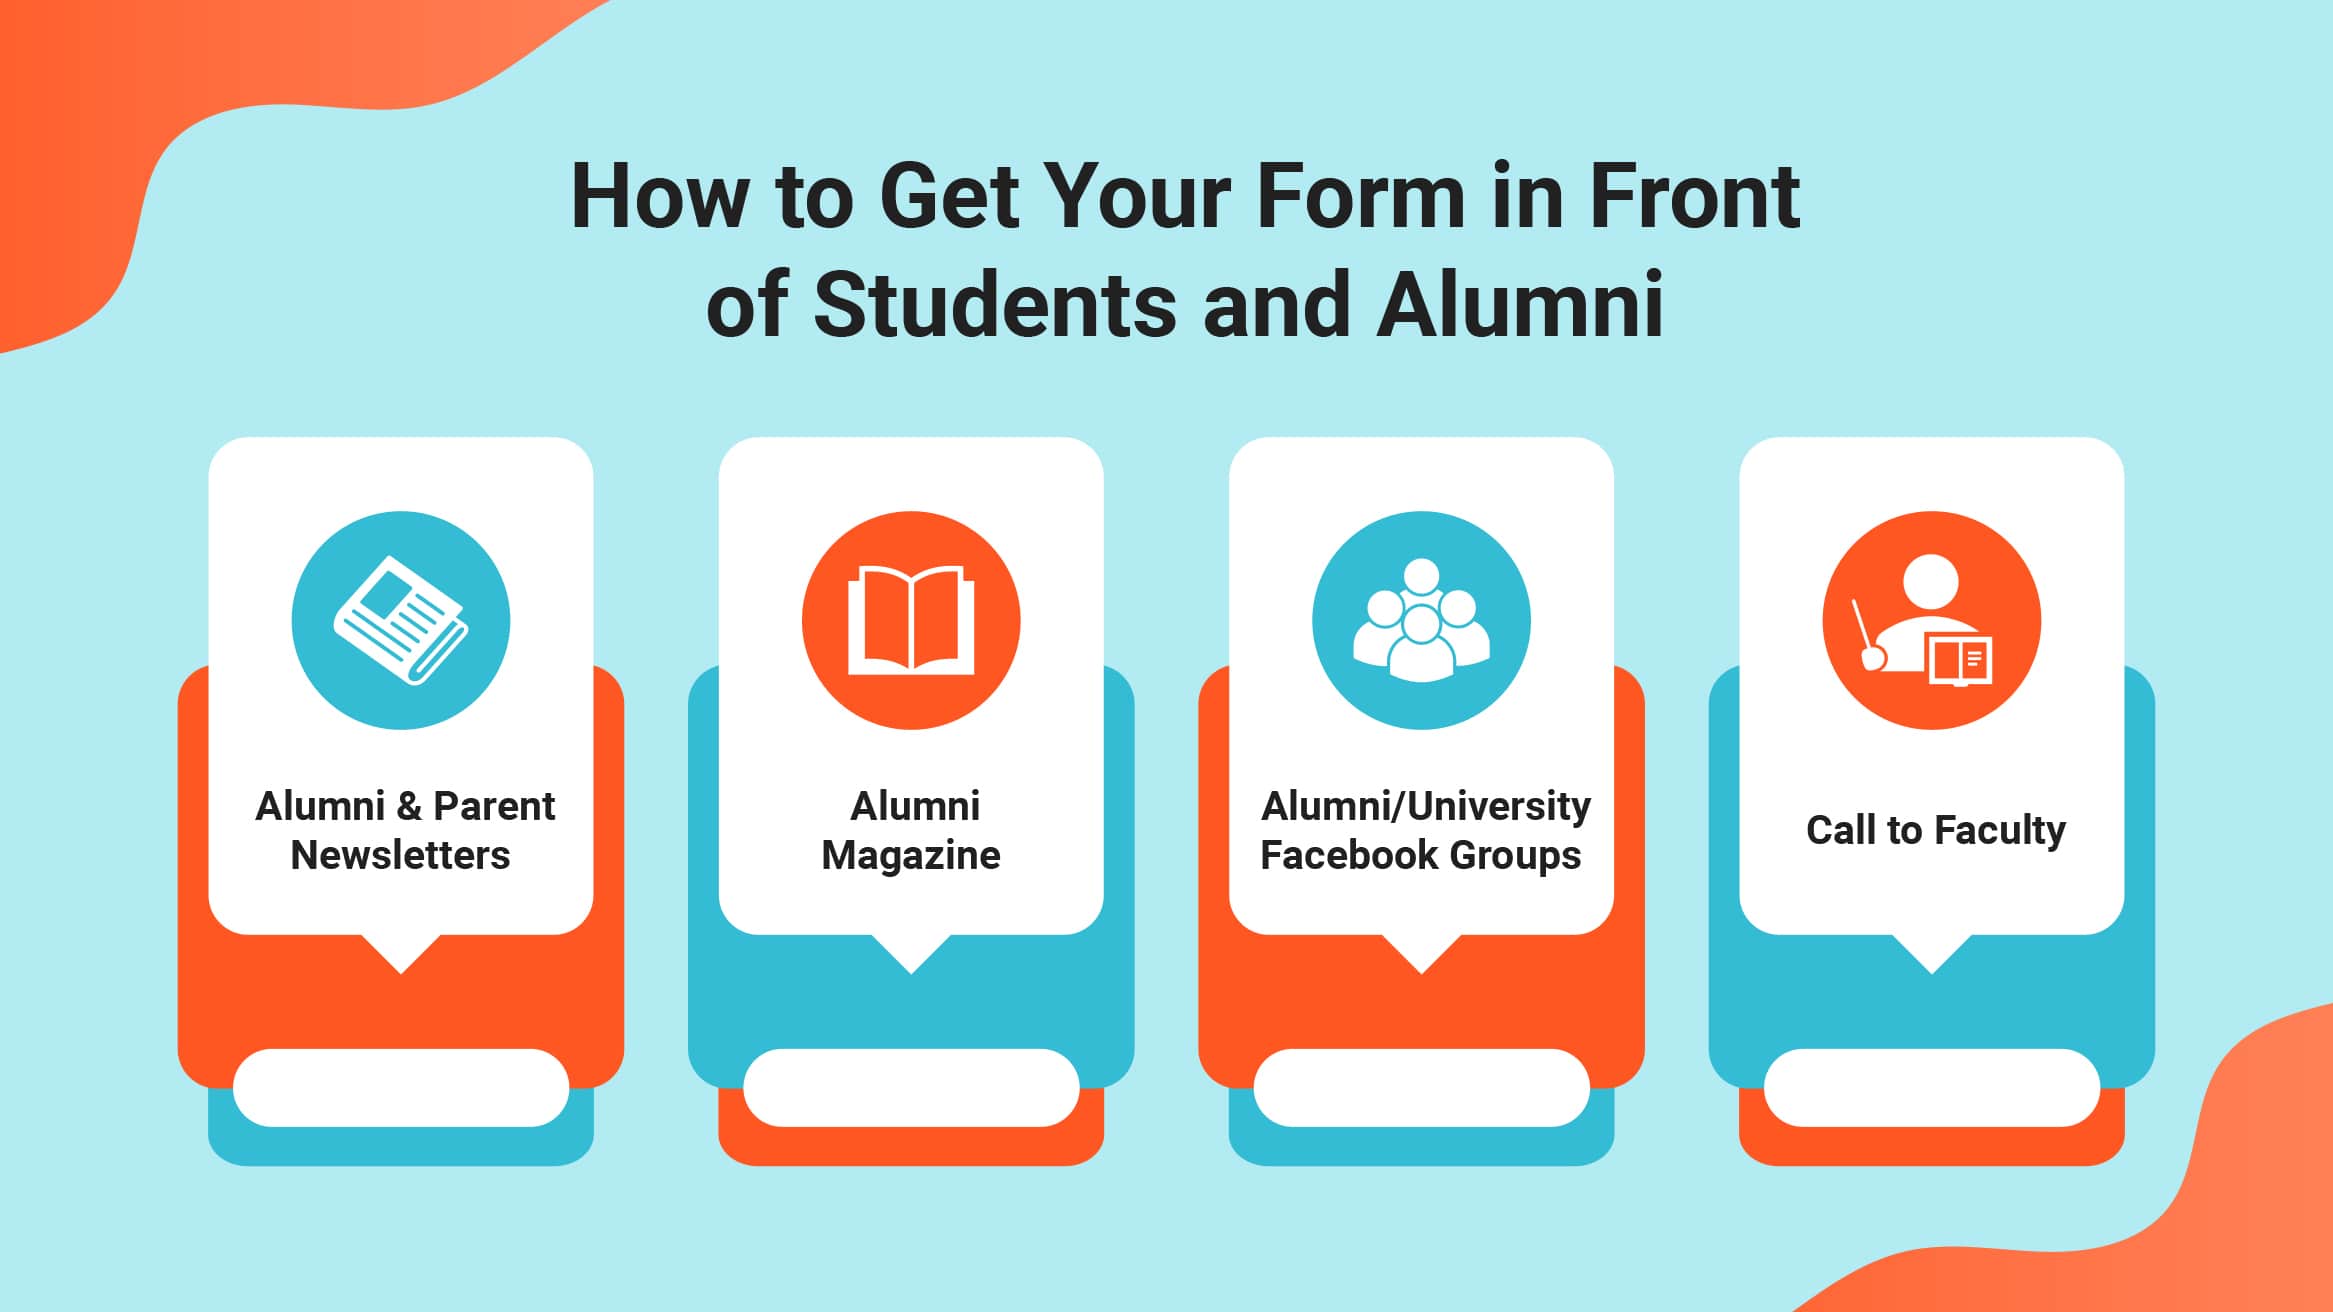 How to Get Your Form in Front of Students and Alumni